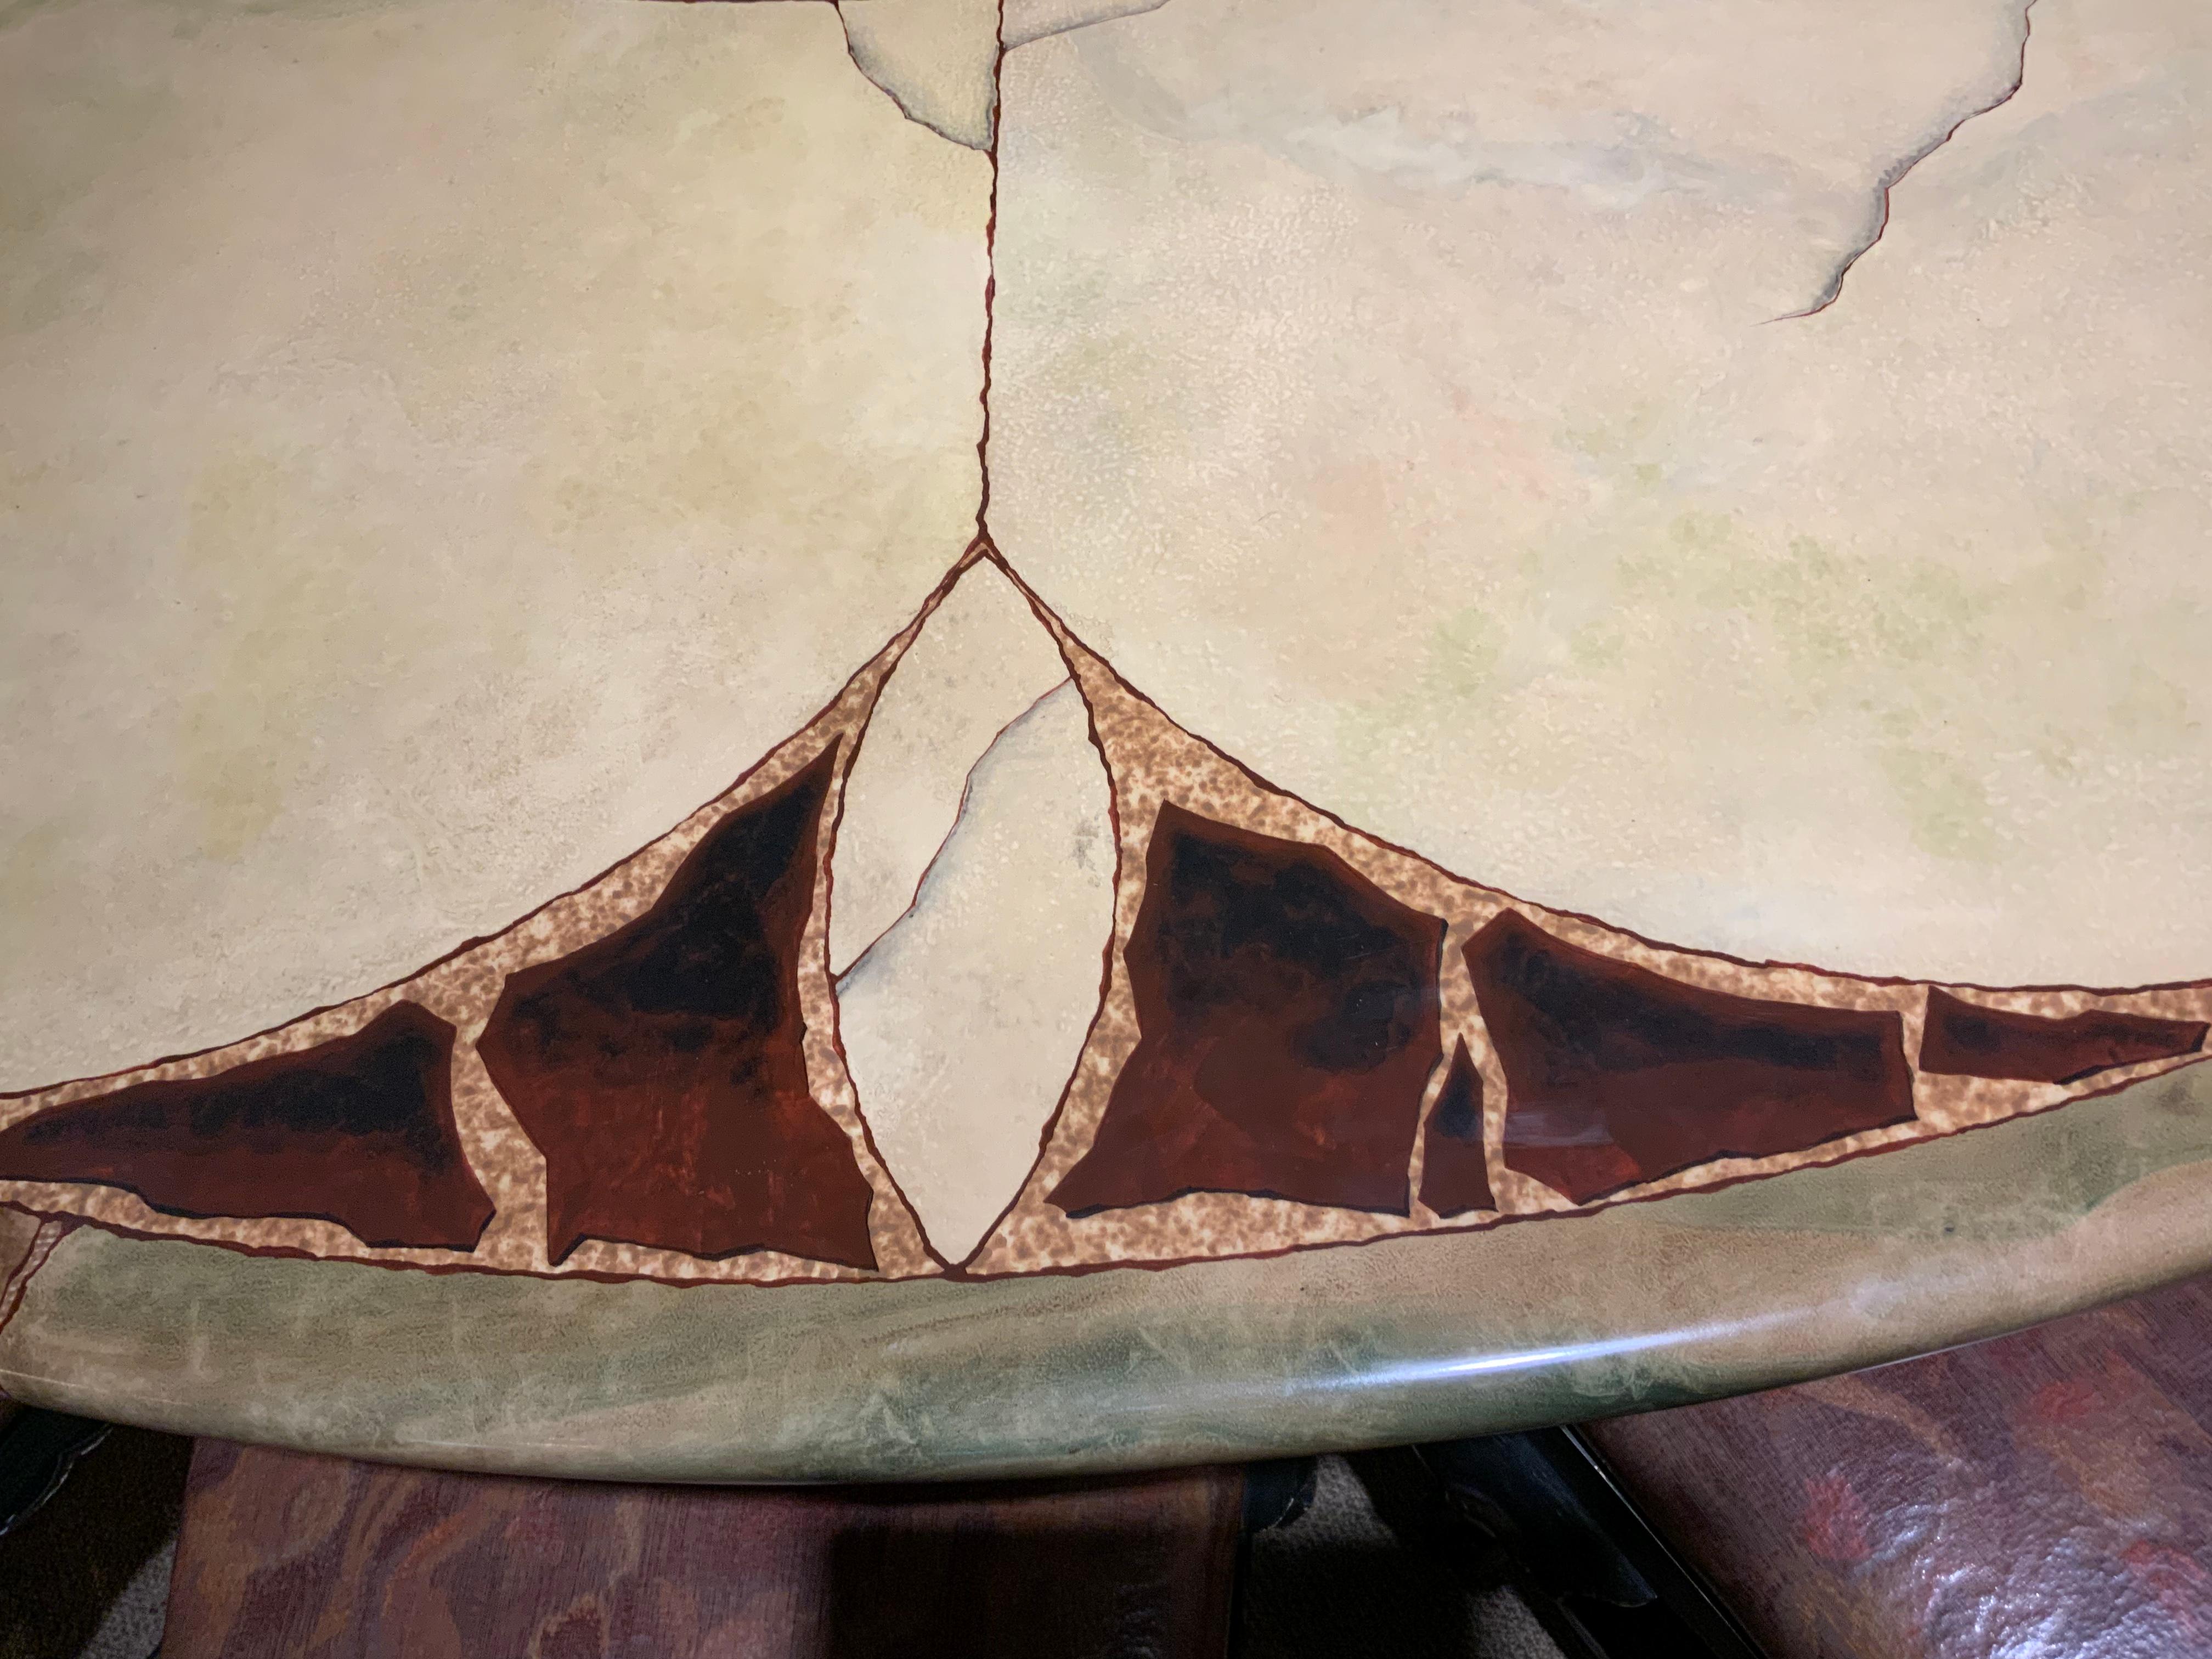 This table is made of wood with a laminated surface with a highly 
Decorative design in shades of cream green and copper colors
It has a glossy finish and is in exceptional Condition. It is 96” in diameter 
And seats 12 people easily. It sits on